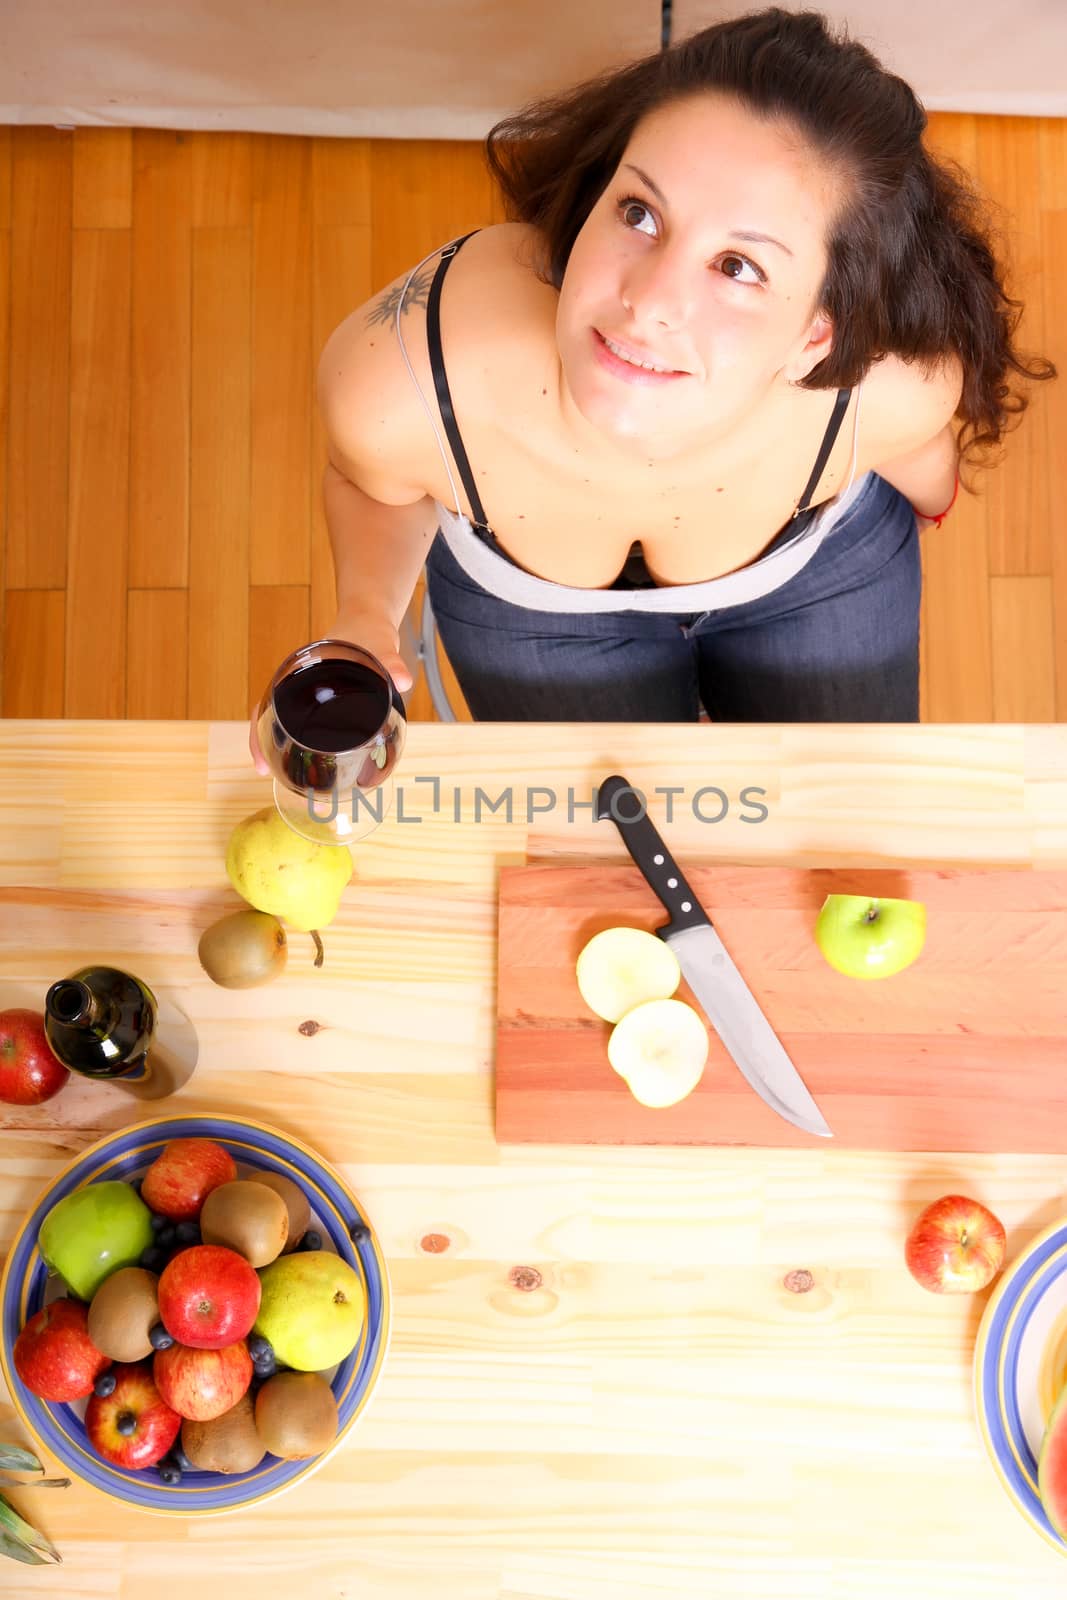 A young adult woman cutting fruits in the kitchen.